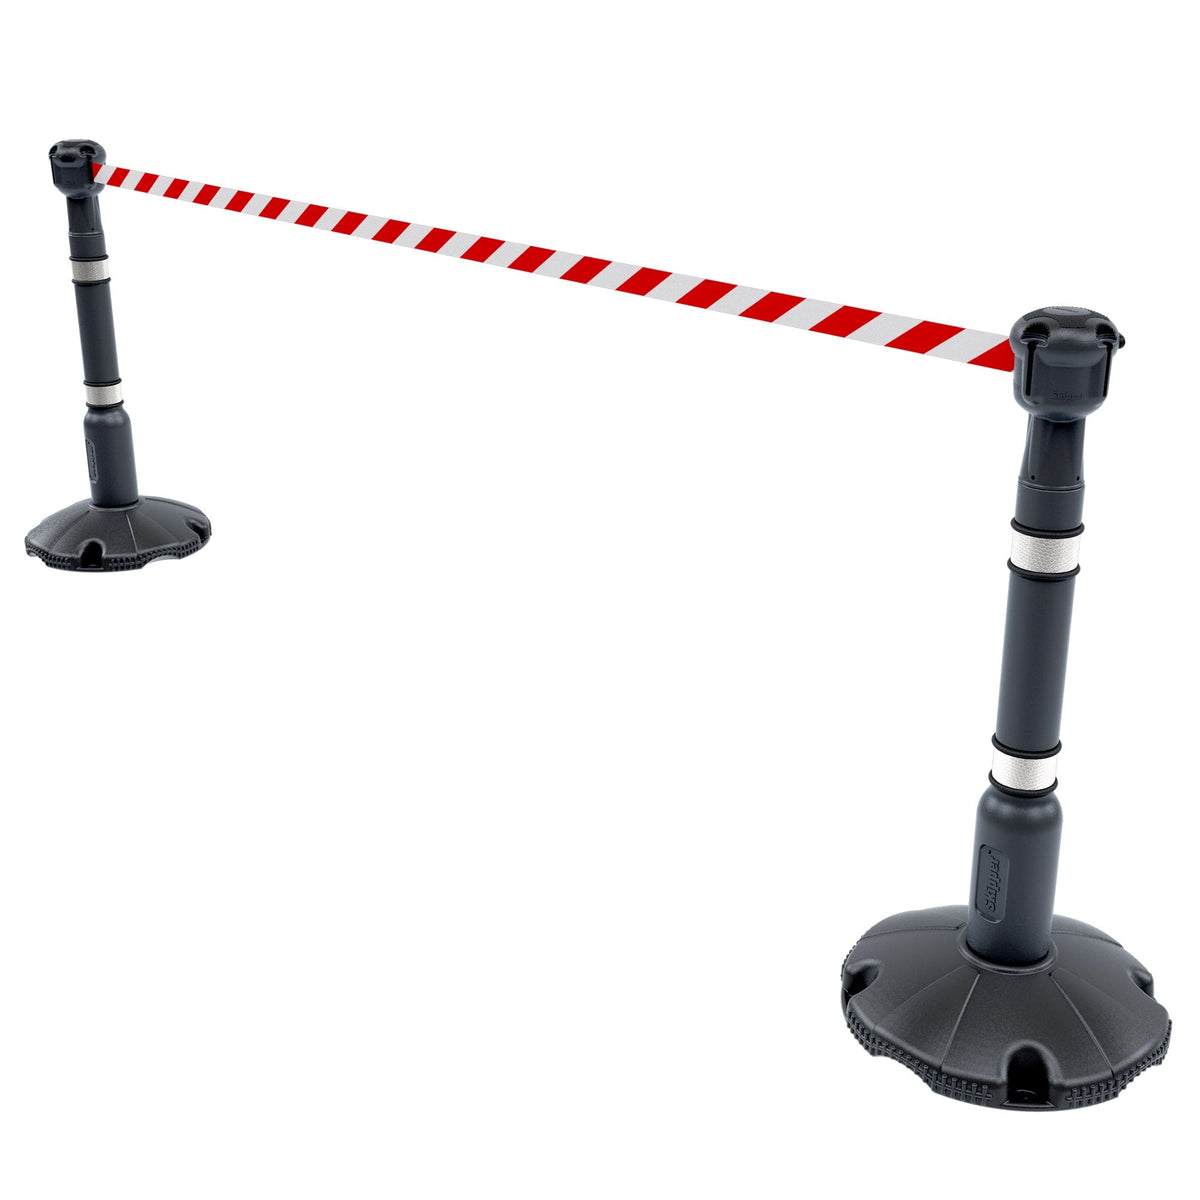 Skipper 9m Retractable Safety Barrier Complete Kit - Kit10 Retractable > Crowd Barrier > Tensa > Skipper One Stop For Safety Silver Red & White Chevron 